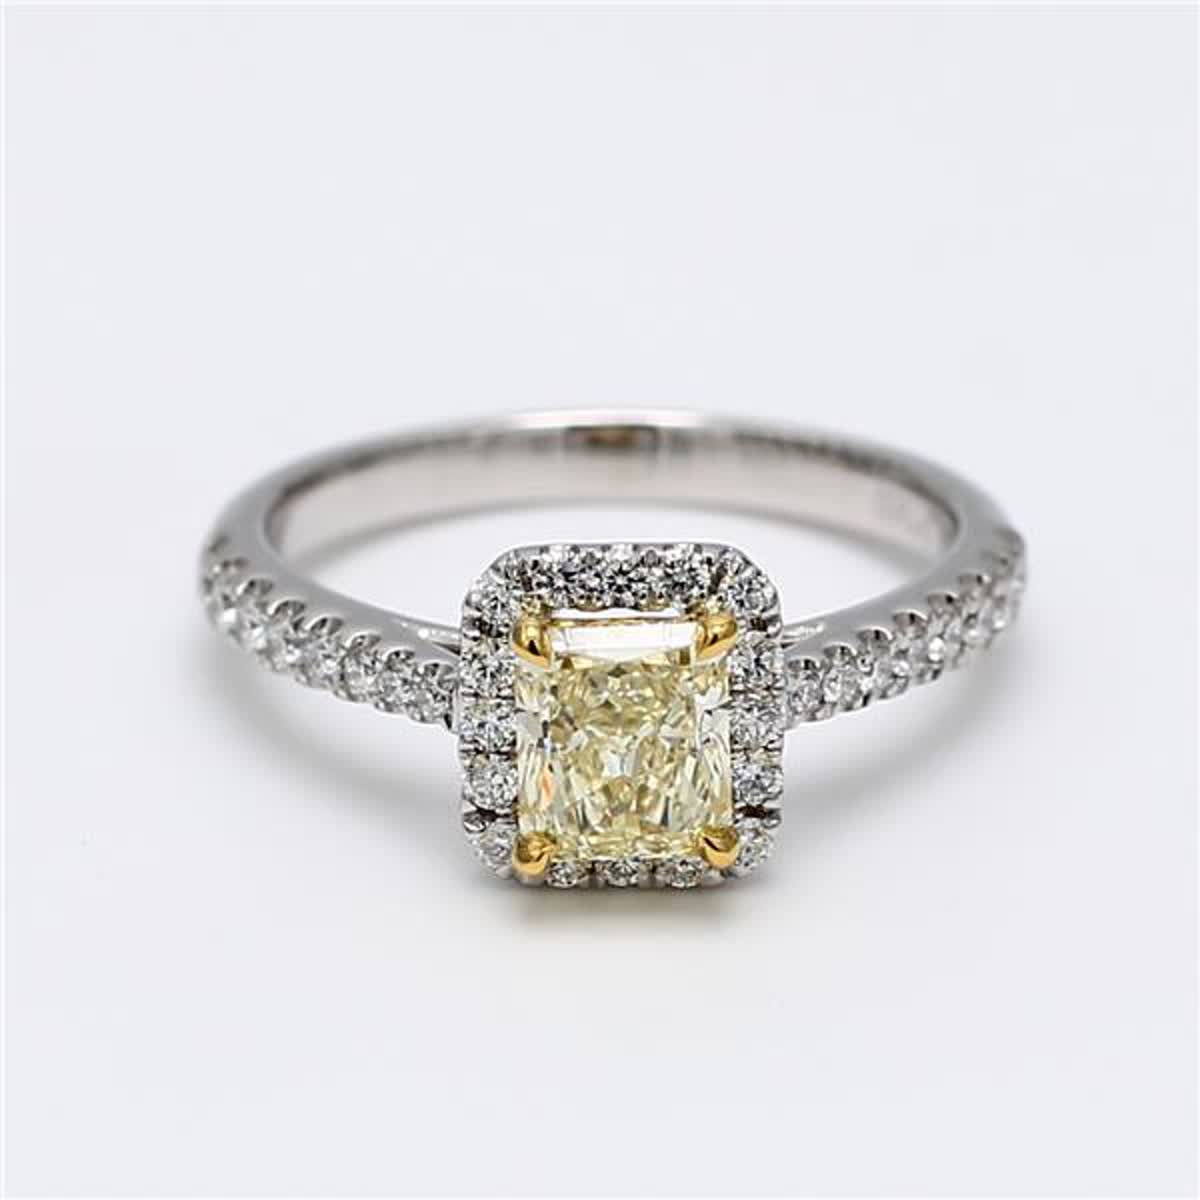 GIA Certified Natural Yellow Radiant and White Diamond 1.33 Carat TW Plat Ring